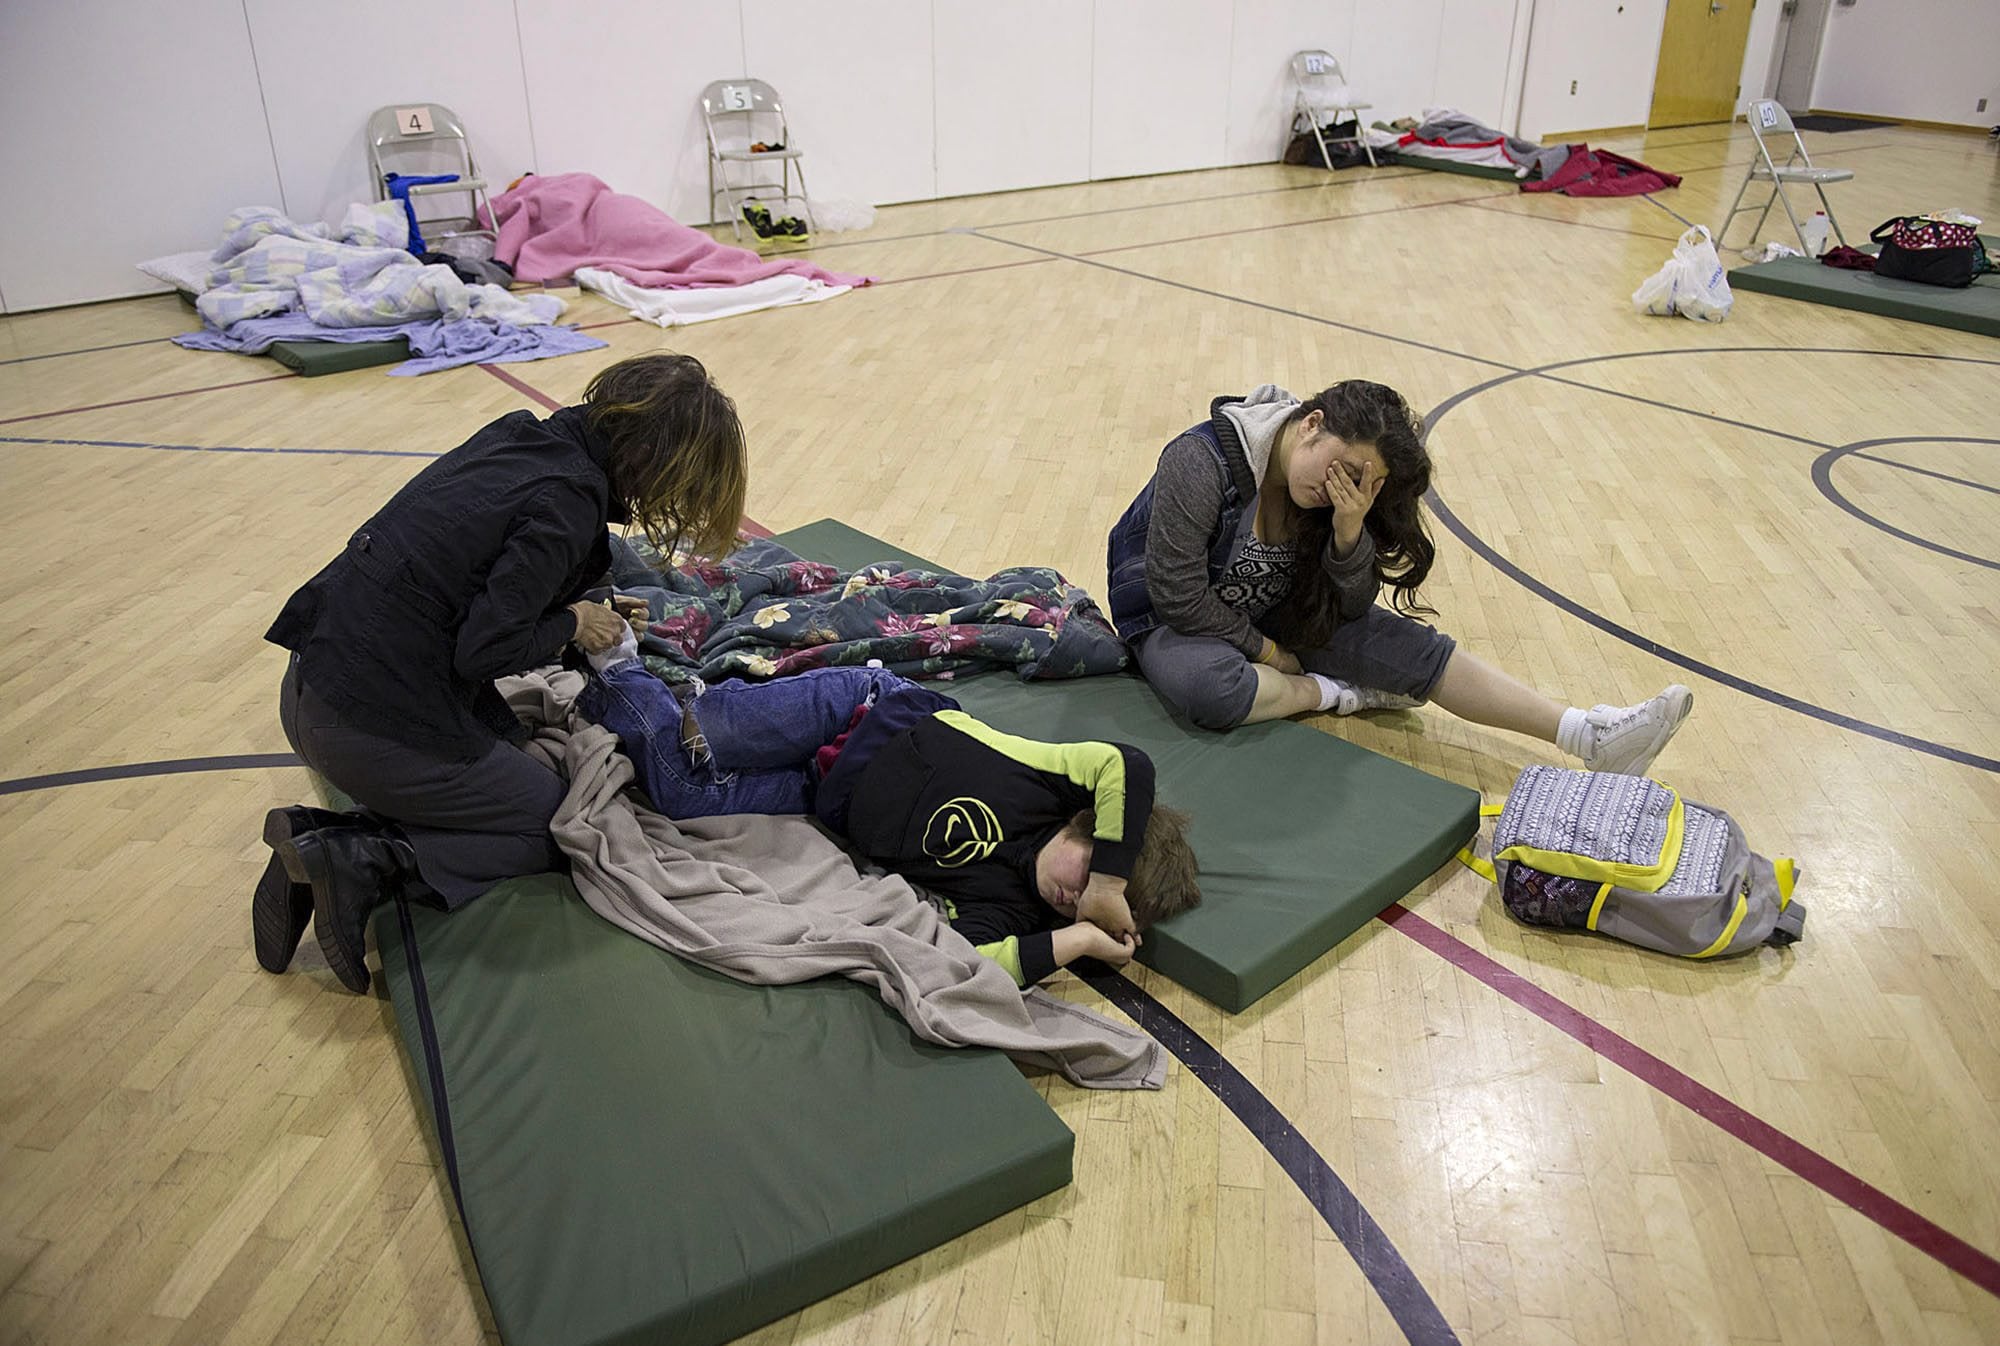 Donna Pinaula, from left, helps wake her kids Johnny Pinaula, 7, and Shyanne Tanguileg, 16, after sleeping all night on the gym floor at St. Andrew Lutheran Church in November as part of the Winter Hospitality Overflow shelter program.